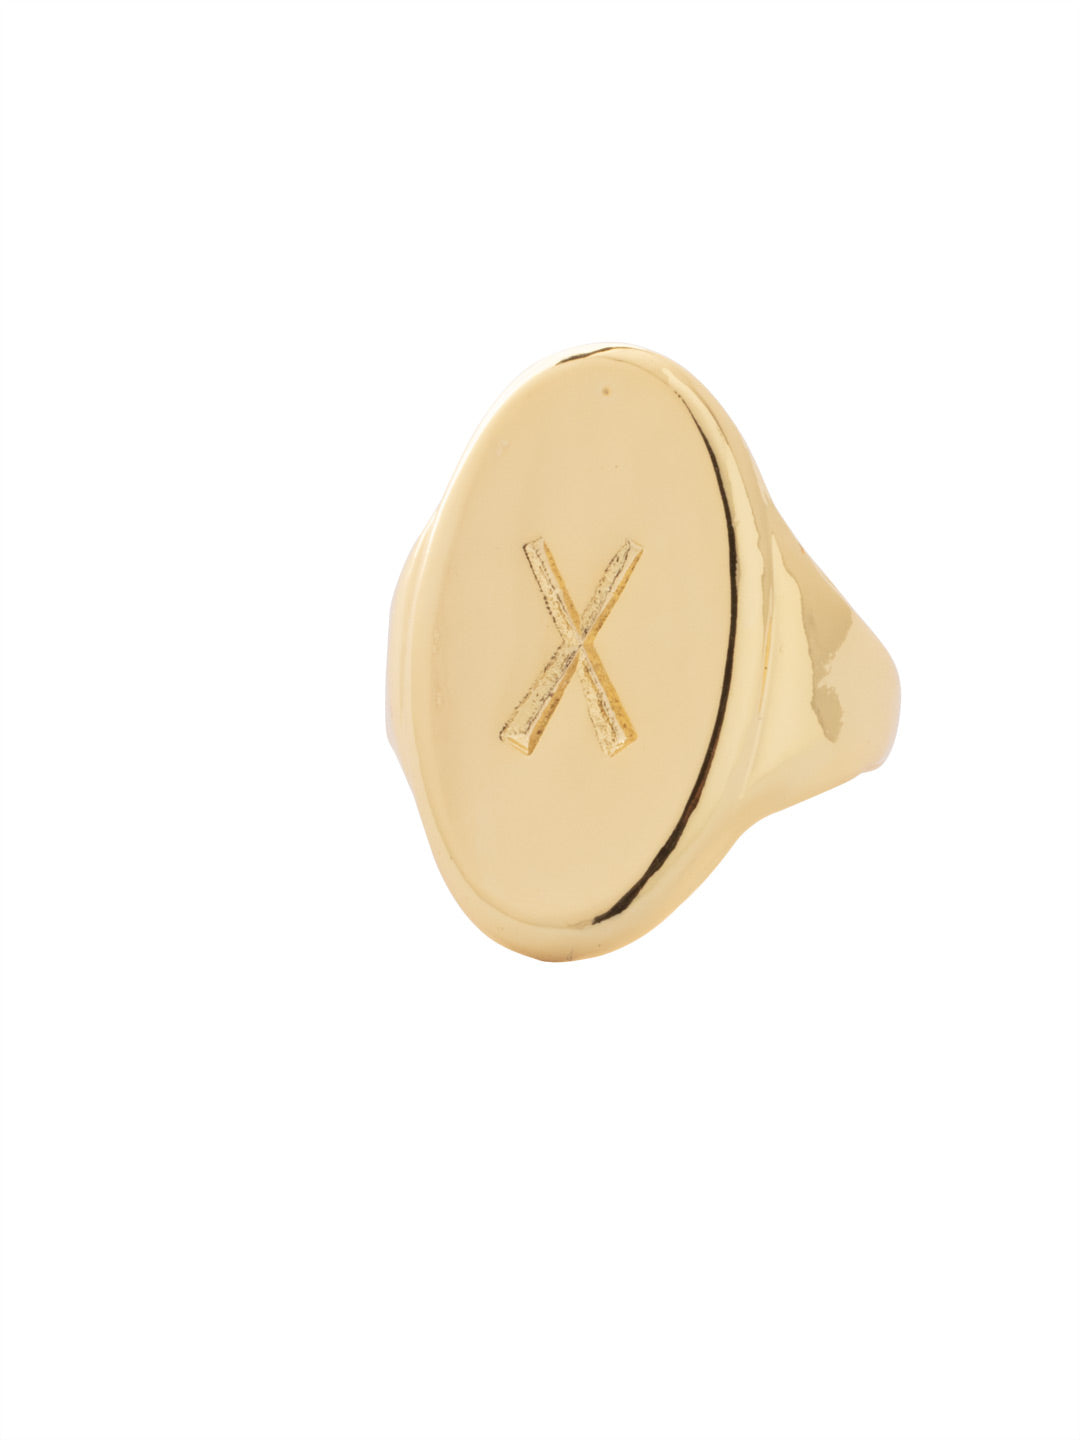 "X" Signet Statement Ring - RFK53BGMTL - <p>The Signet Statement Ring features a capital letter stamped into an oblong metal disk on an adjustable ring band. From Sorrelli's Bare Metallic collection in our Bright Gold-tone finish.</p>